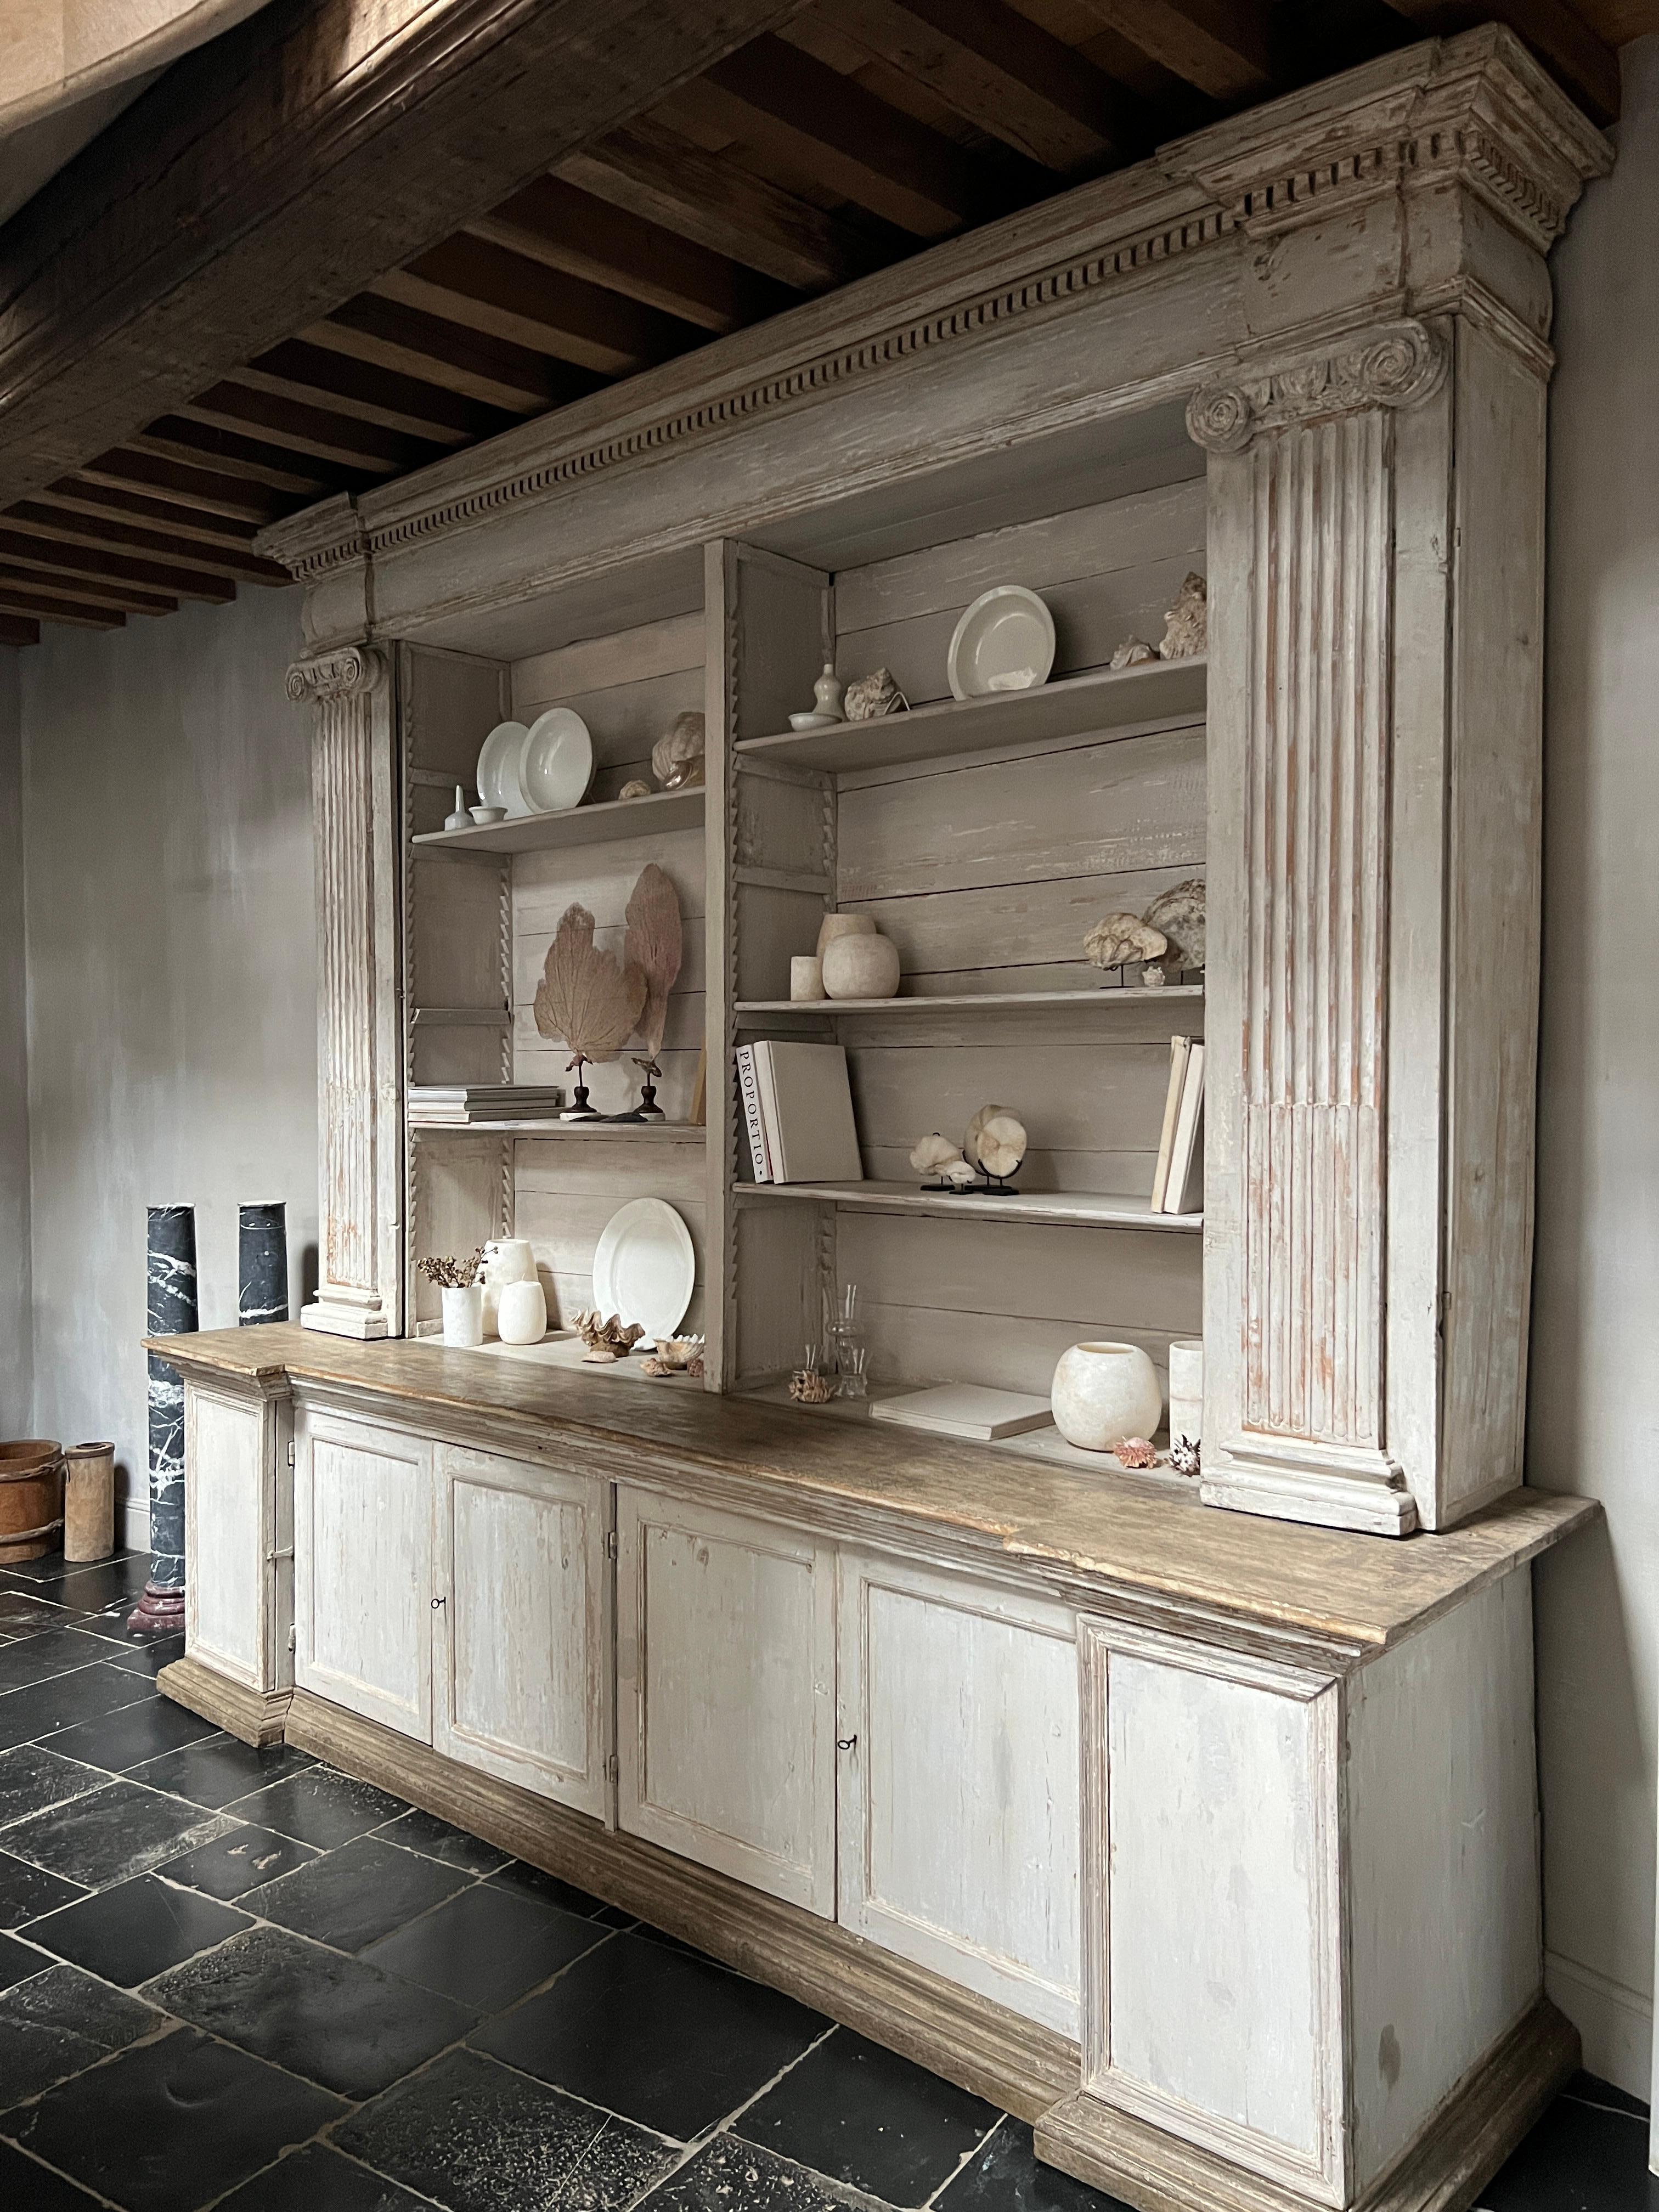 A large open display cupboard/bookcase. Made in Mantua Italy at the end of the 18th century for a monastery from local poplar and pine. Beautifully proportioned neoclassical style with ionic kapitels and fine moulding. Hidden doors in the colomns